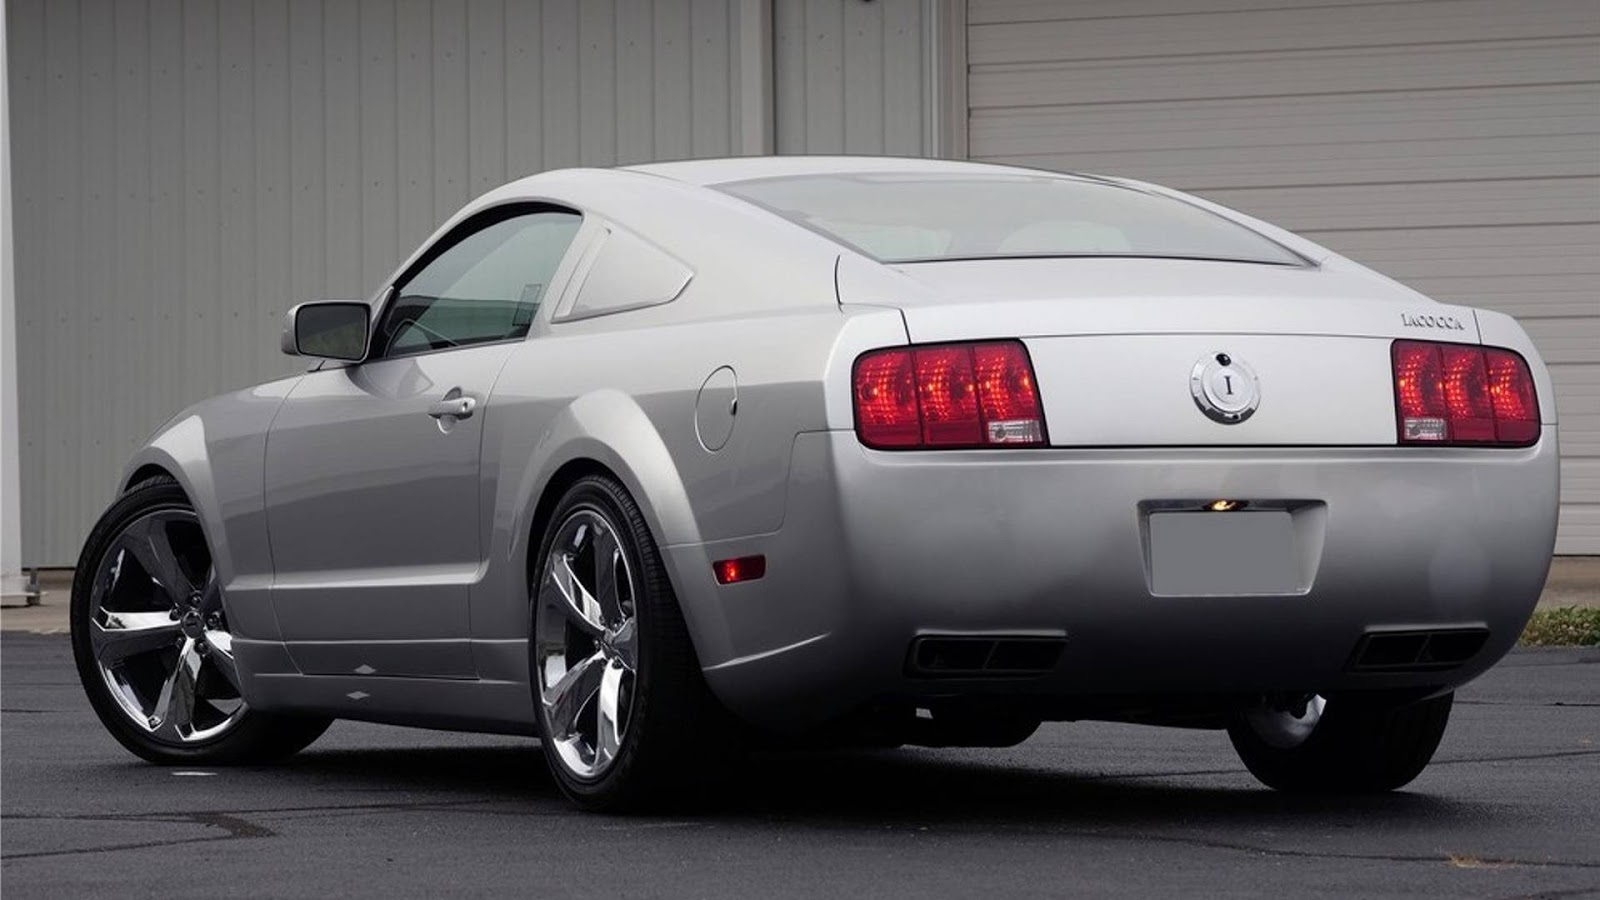 2009 ford mustang iacocca 45th anniversary edition2B3 Ο νονός της Mustang, Lee Iacocca, απεβίωσε στα 94 του